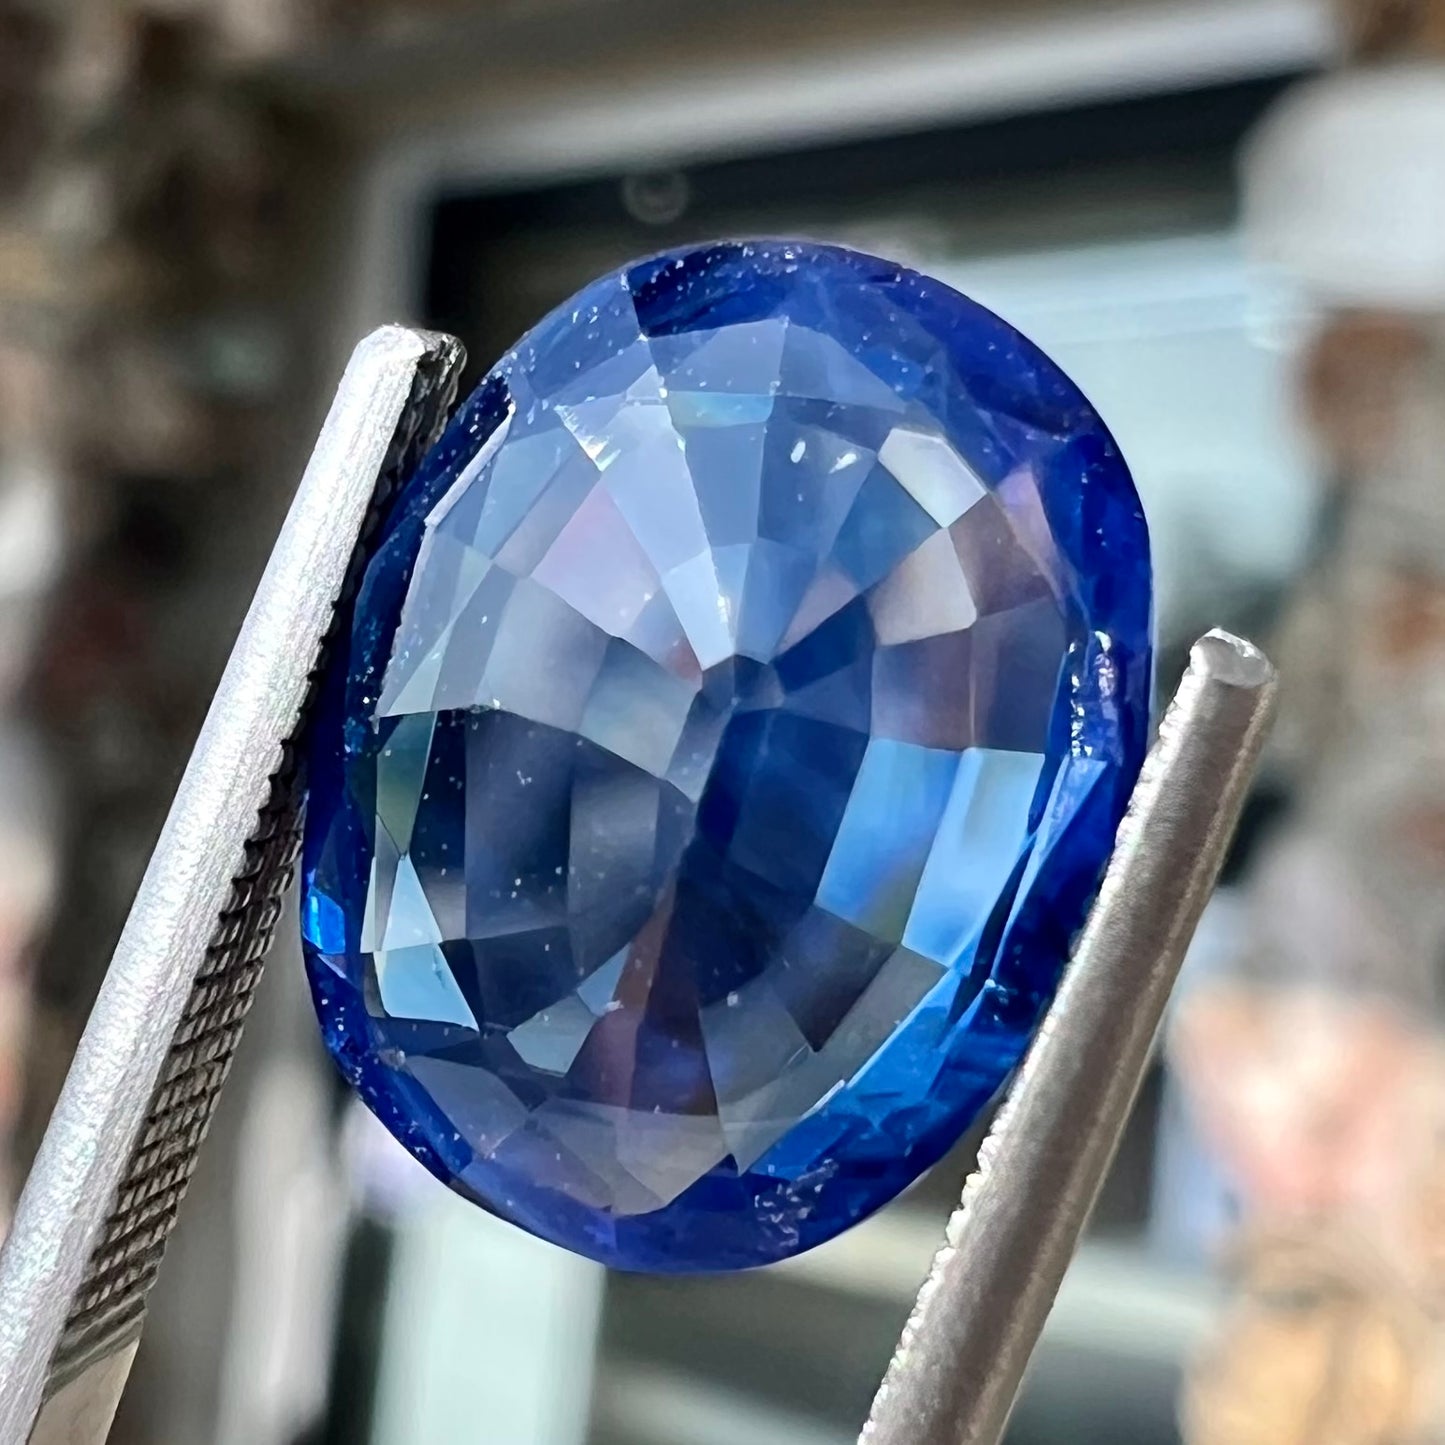 A 4.80 carat oval cut blue sapphire stone.  The stone is natural and has been heated to enhance its blue color.